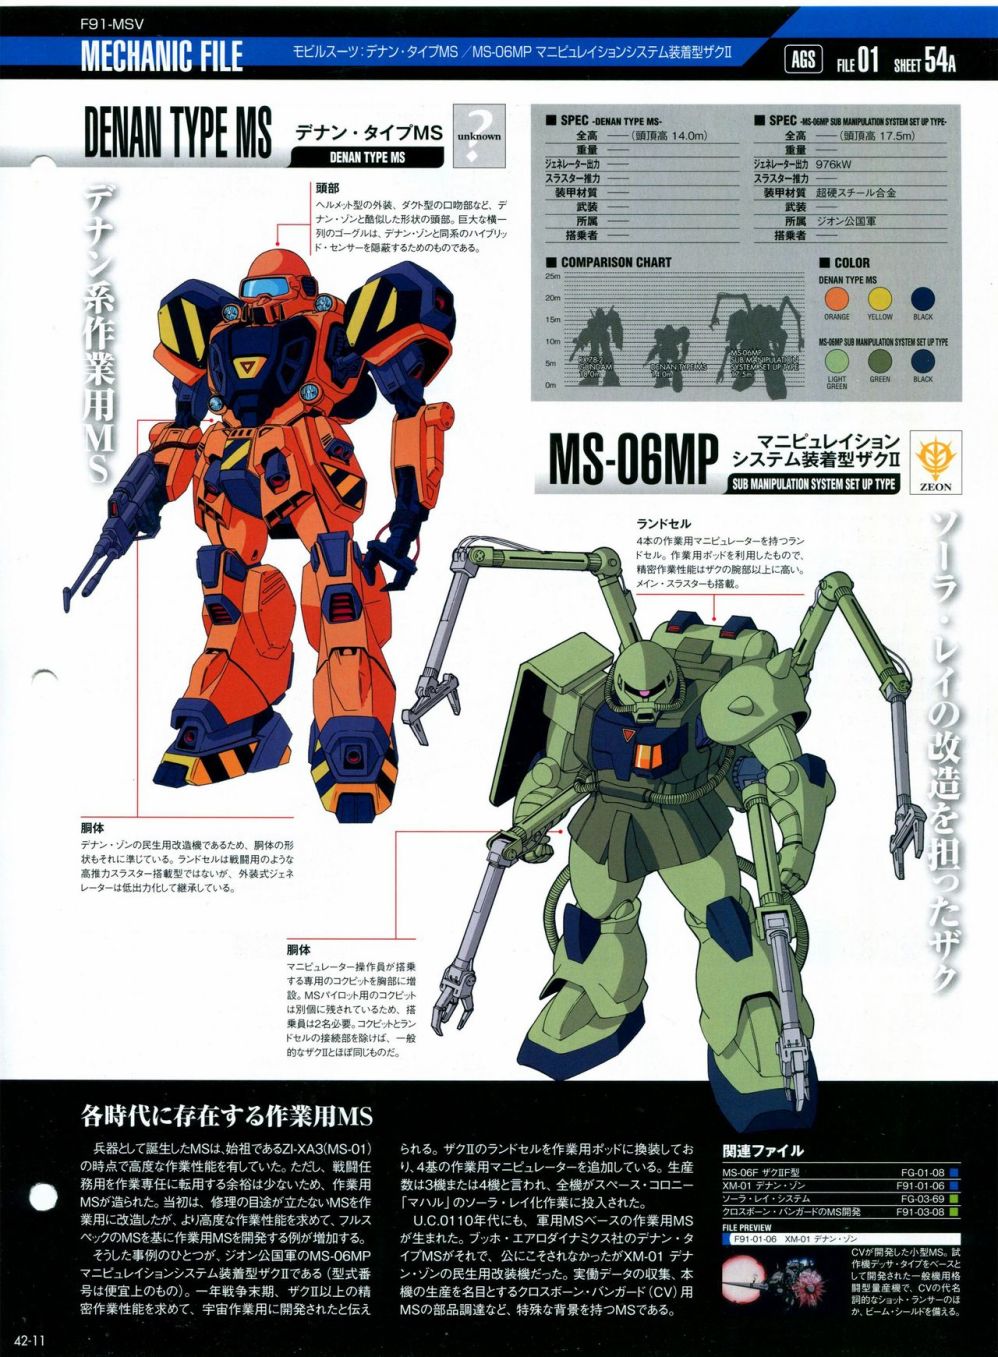 The Official Gundam Perfect File  - 第46-50話(1/4) - 5